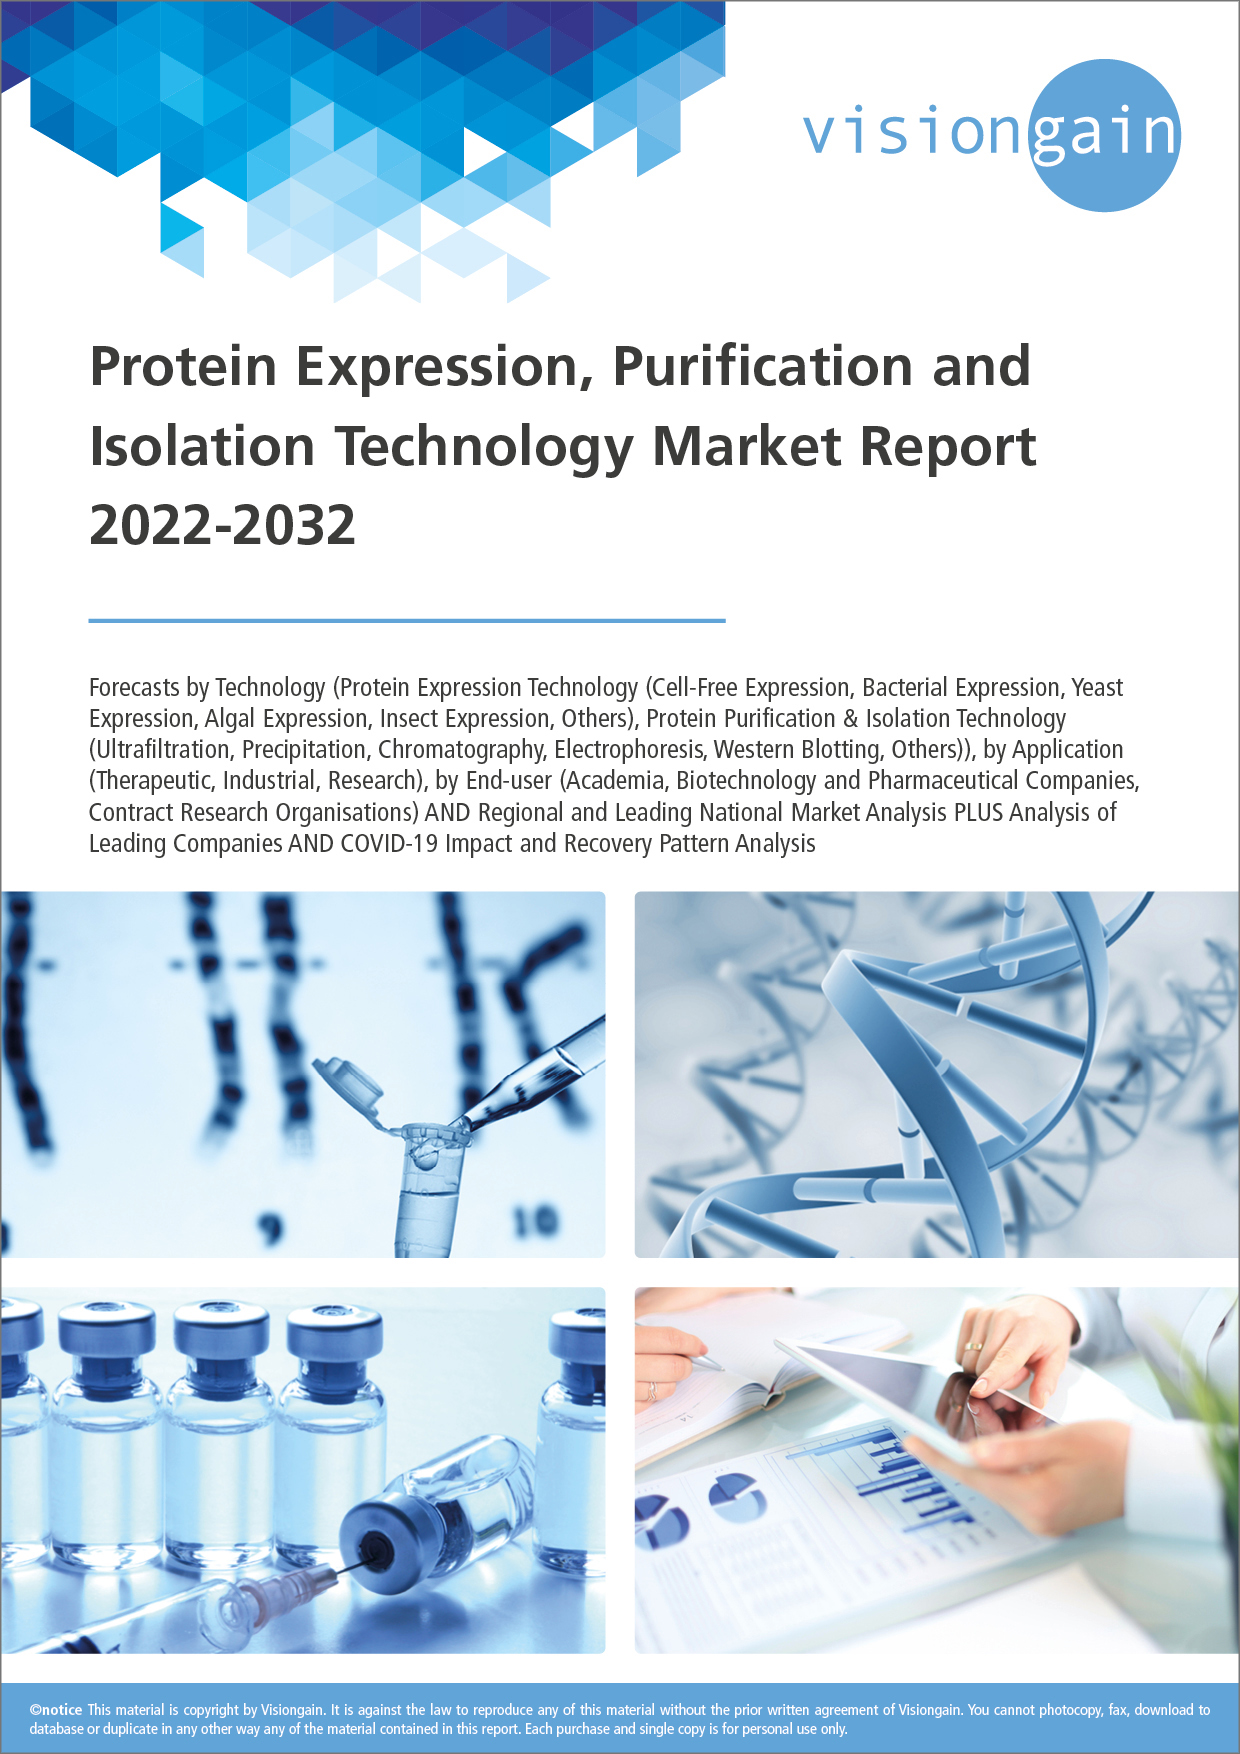 Protein Expression, Purification and Isolation Technology Market Report 2022-2032